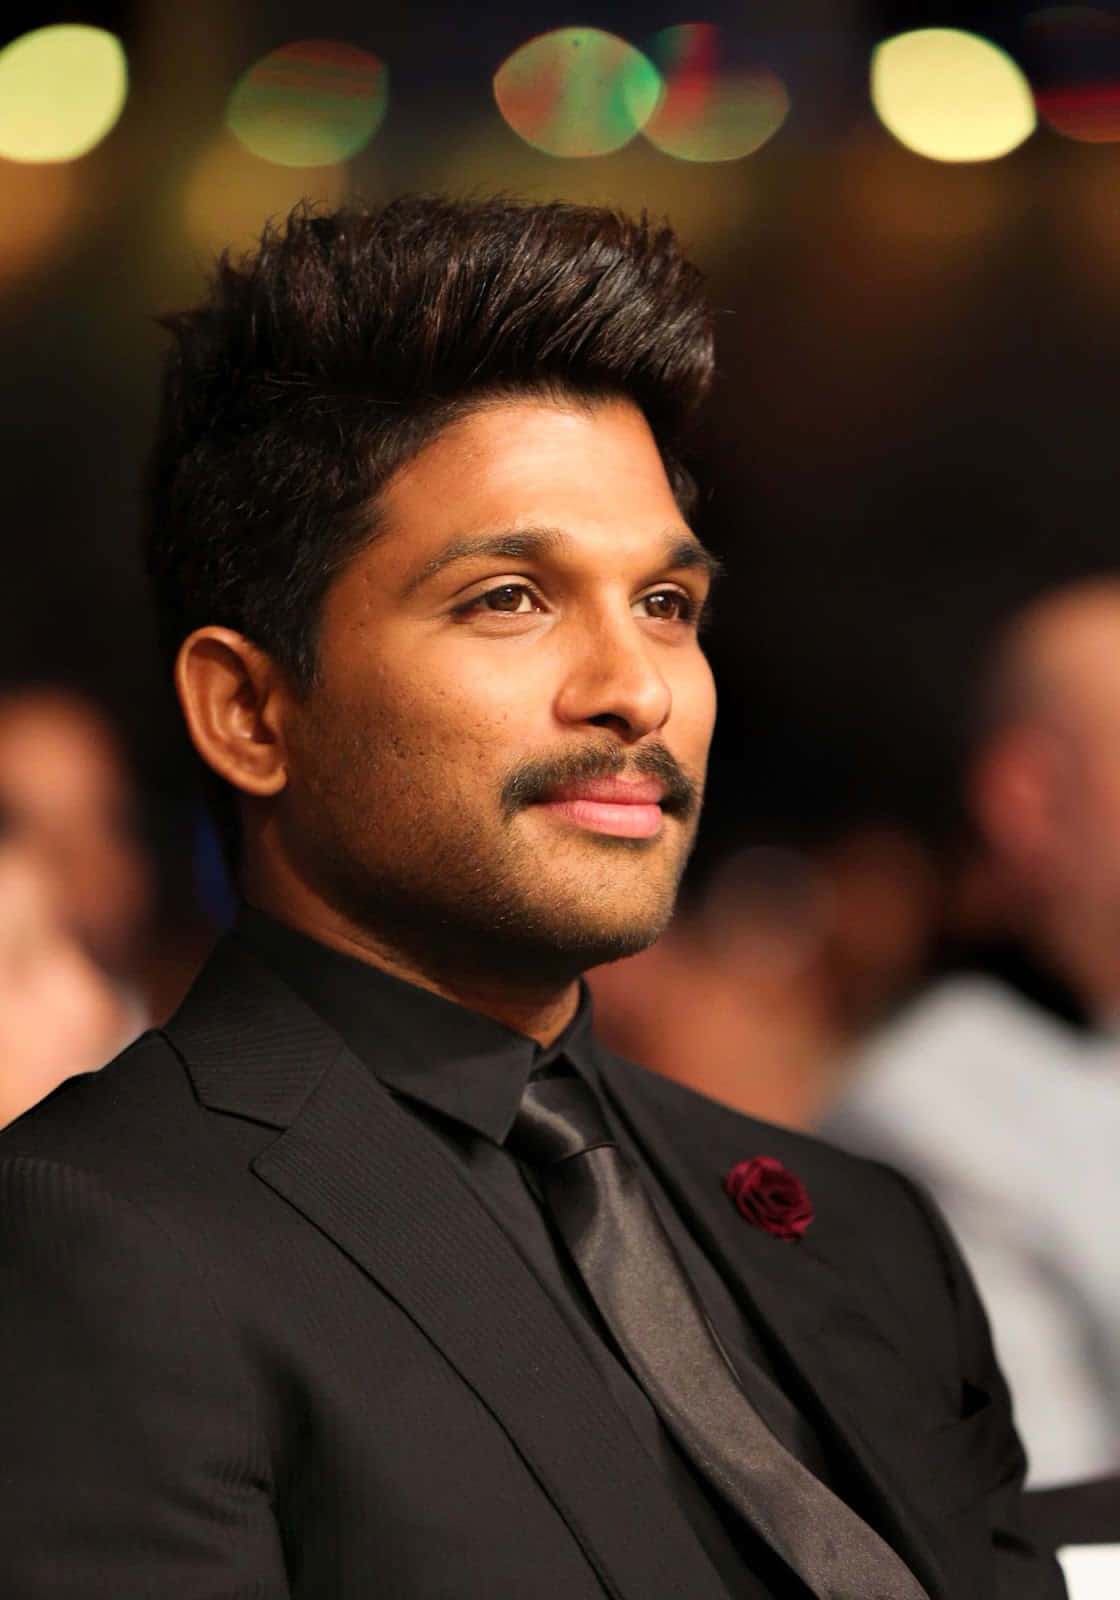 Enigmatic Stance of Allu Arjun - South Indian Superstar